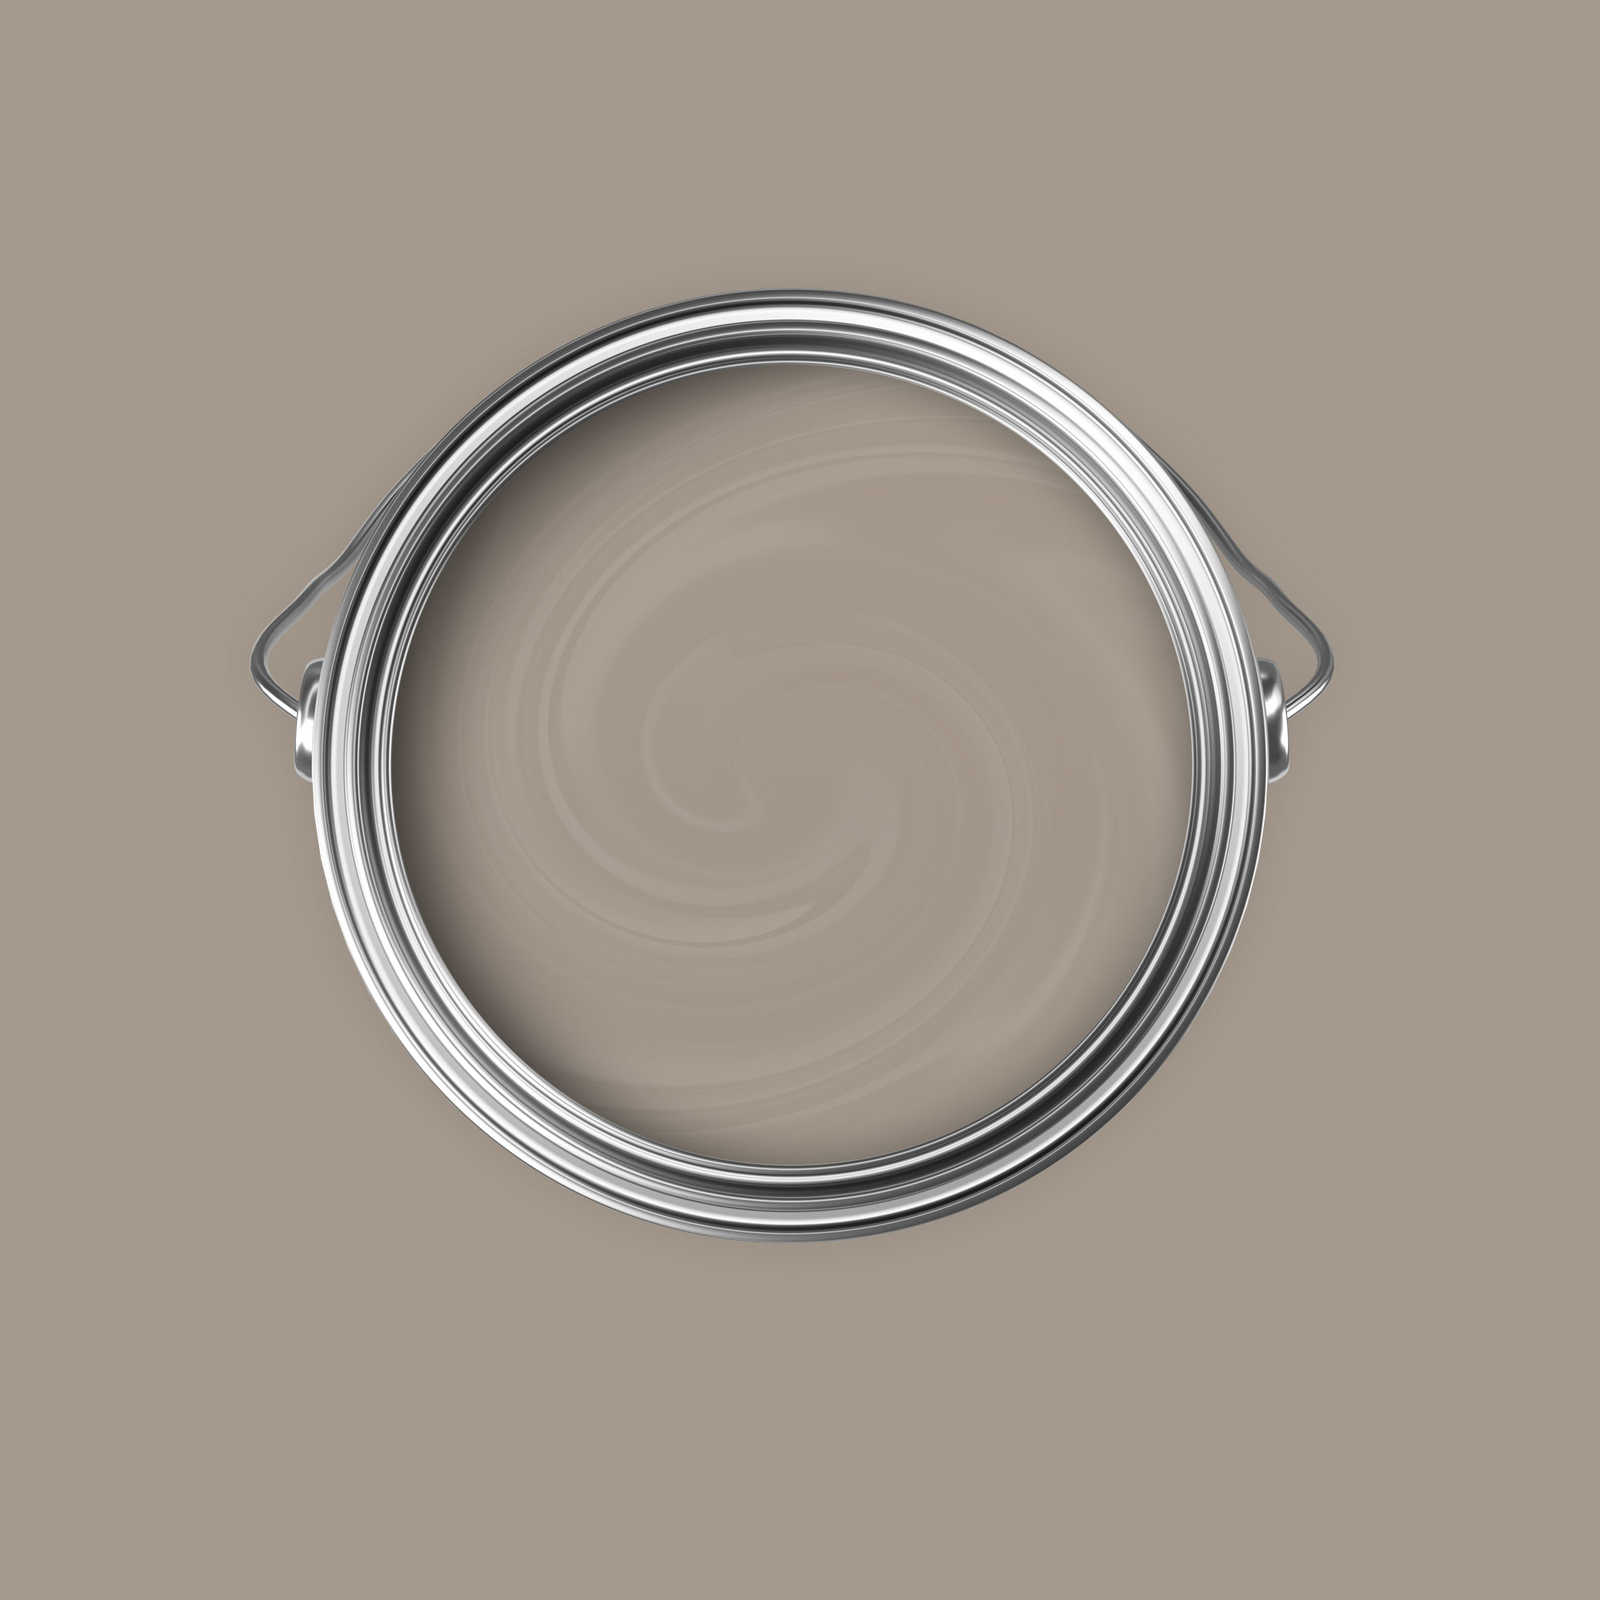             Premium Wall Paint Balanced Taupe »Talented calm taupe« NW701 – 5 litre
        